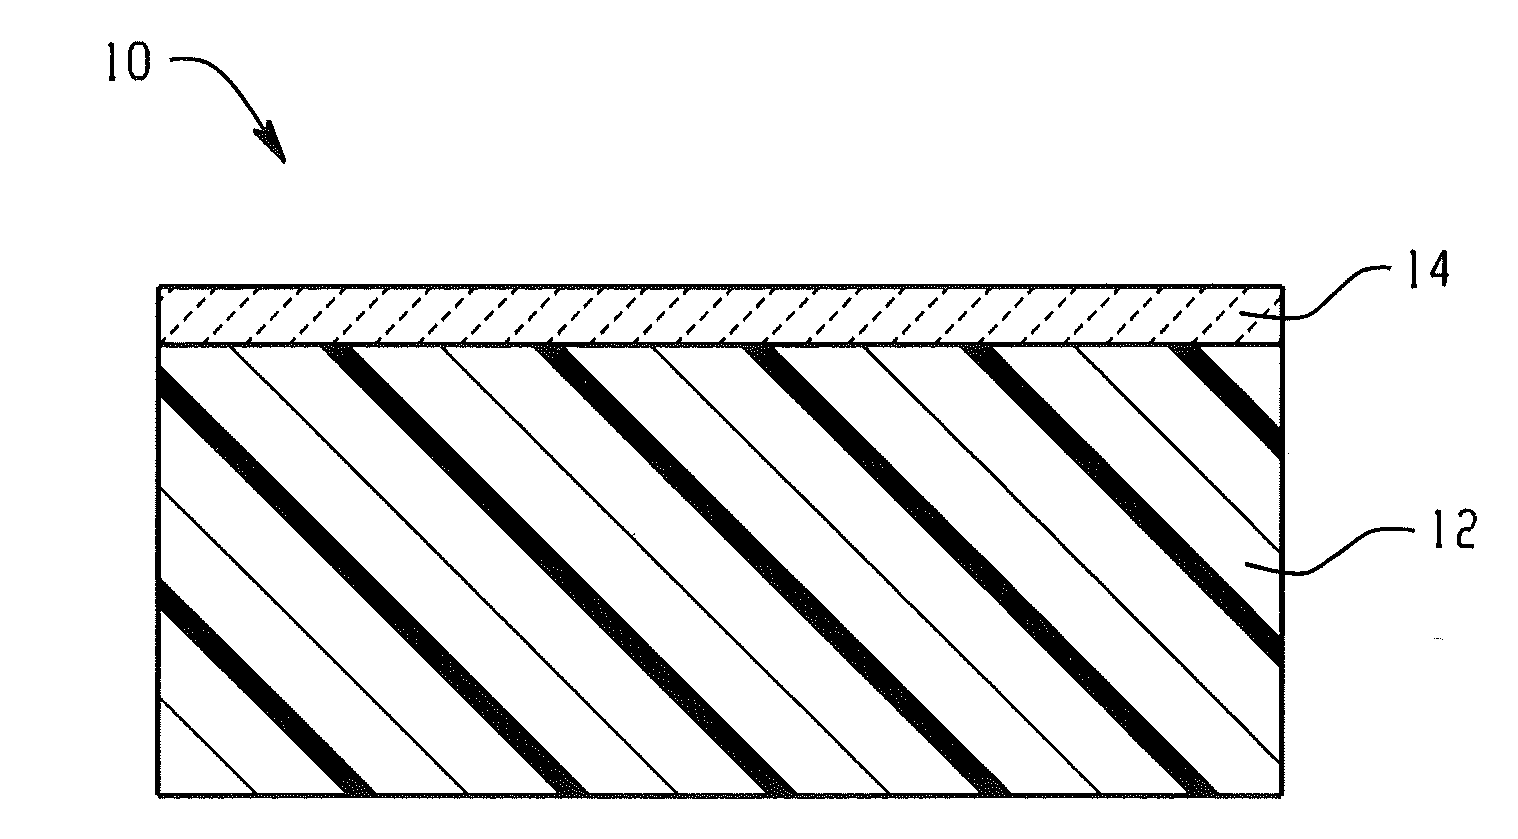 Multilayer sheet and methods of making and articles comprising the multilayer sheet